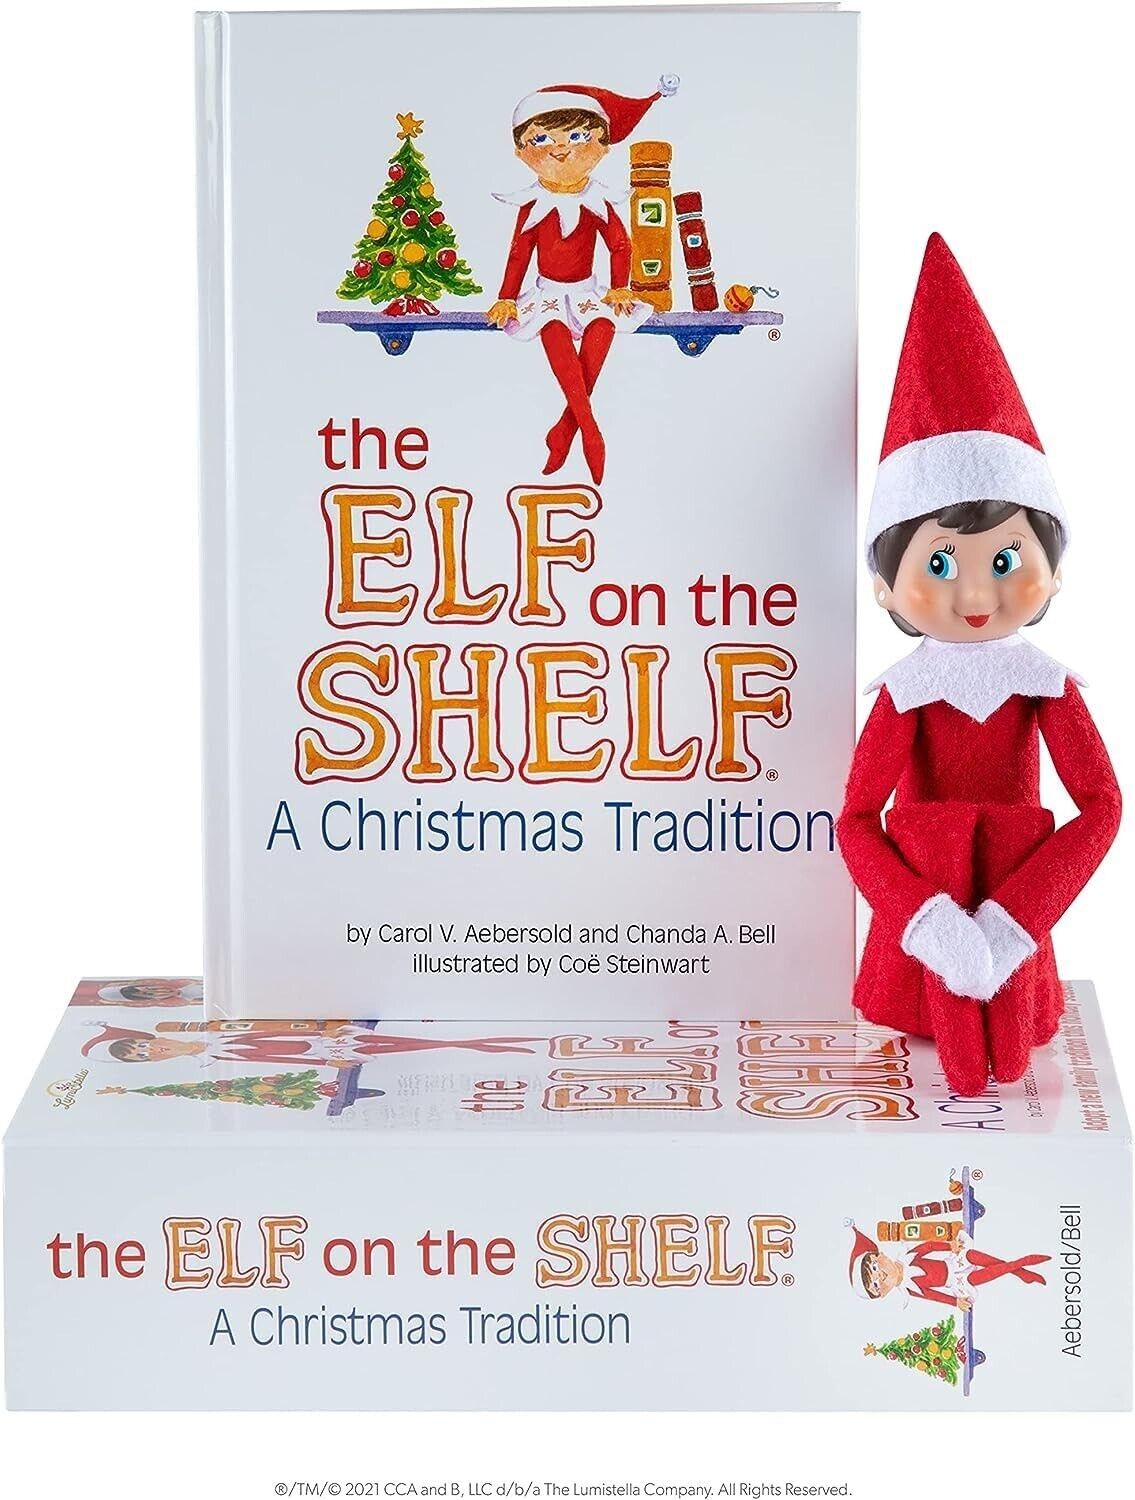 Elf on The Shelf: A Christmas Tradition - Blue-Eyed Girl Scout Elf